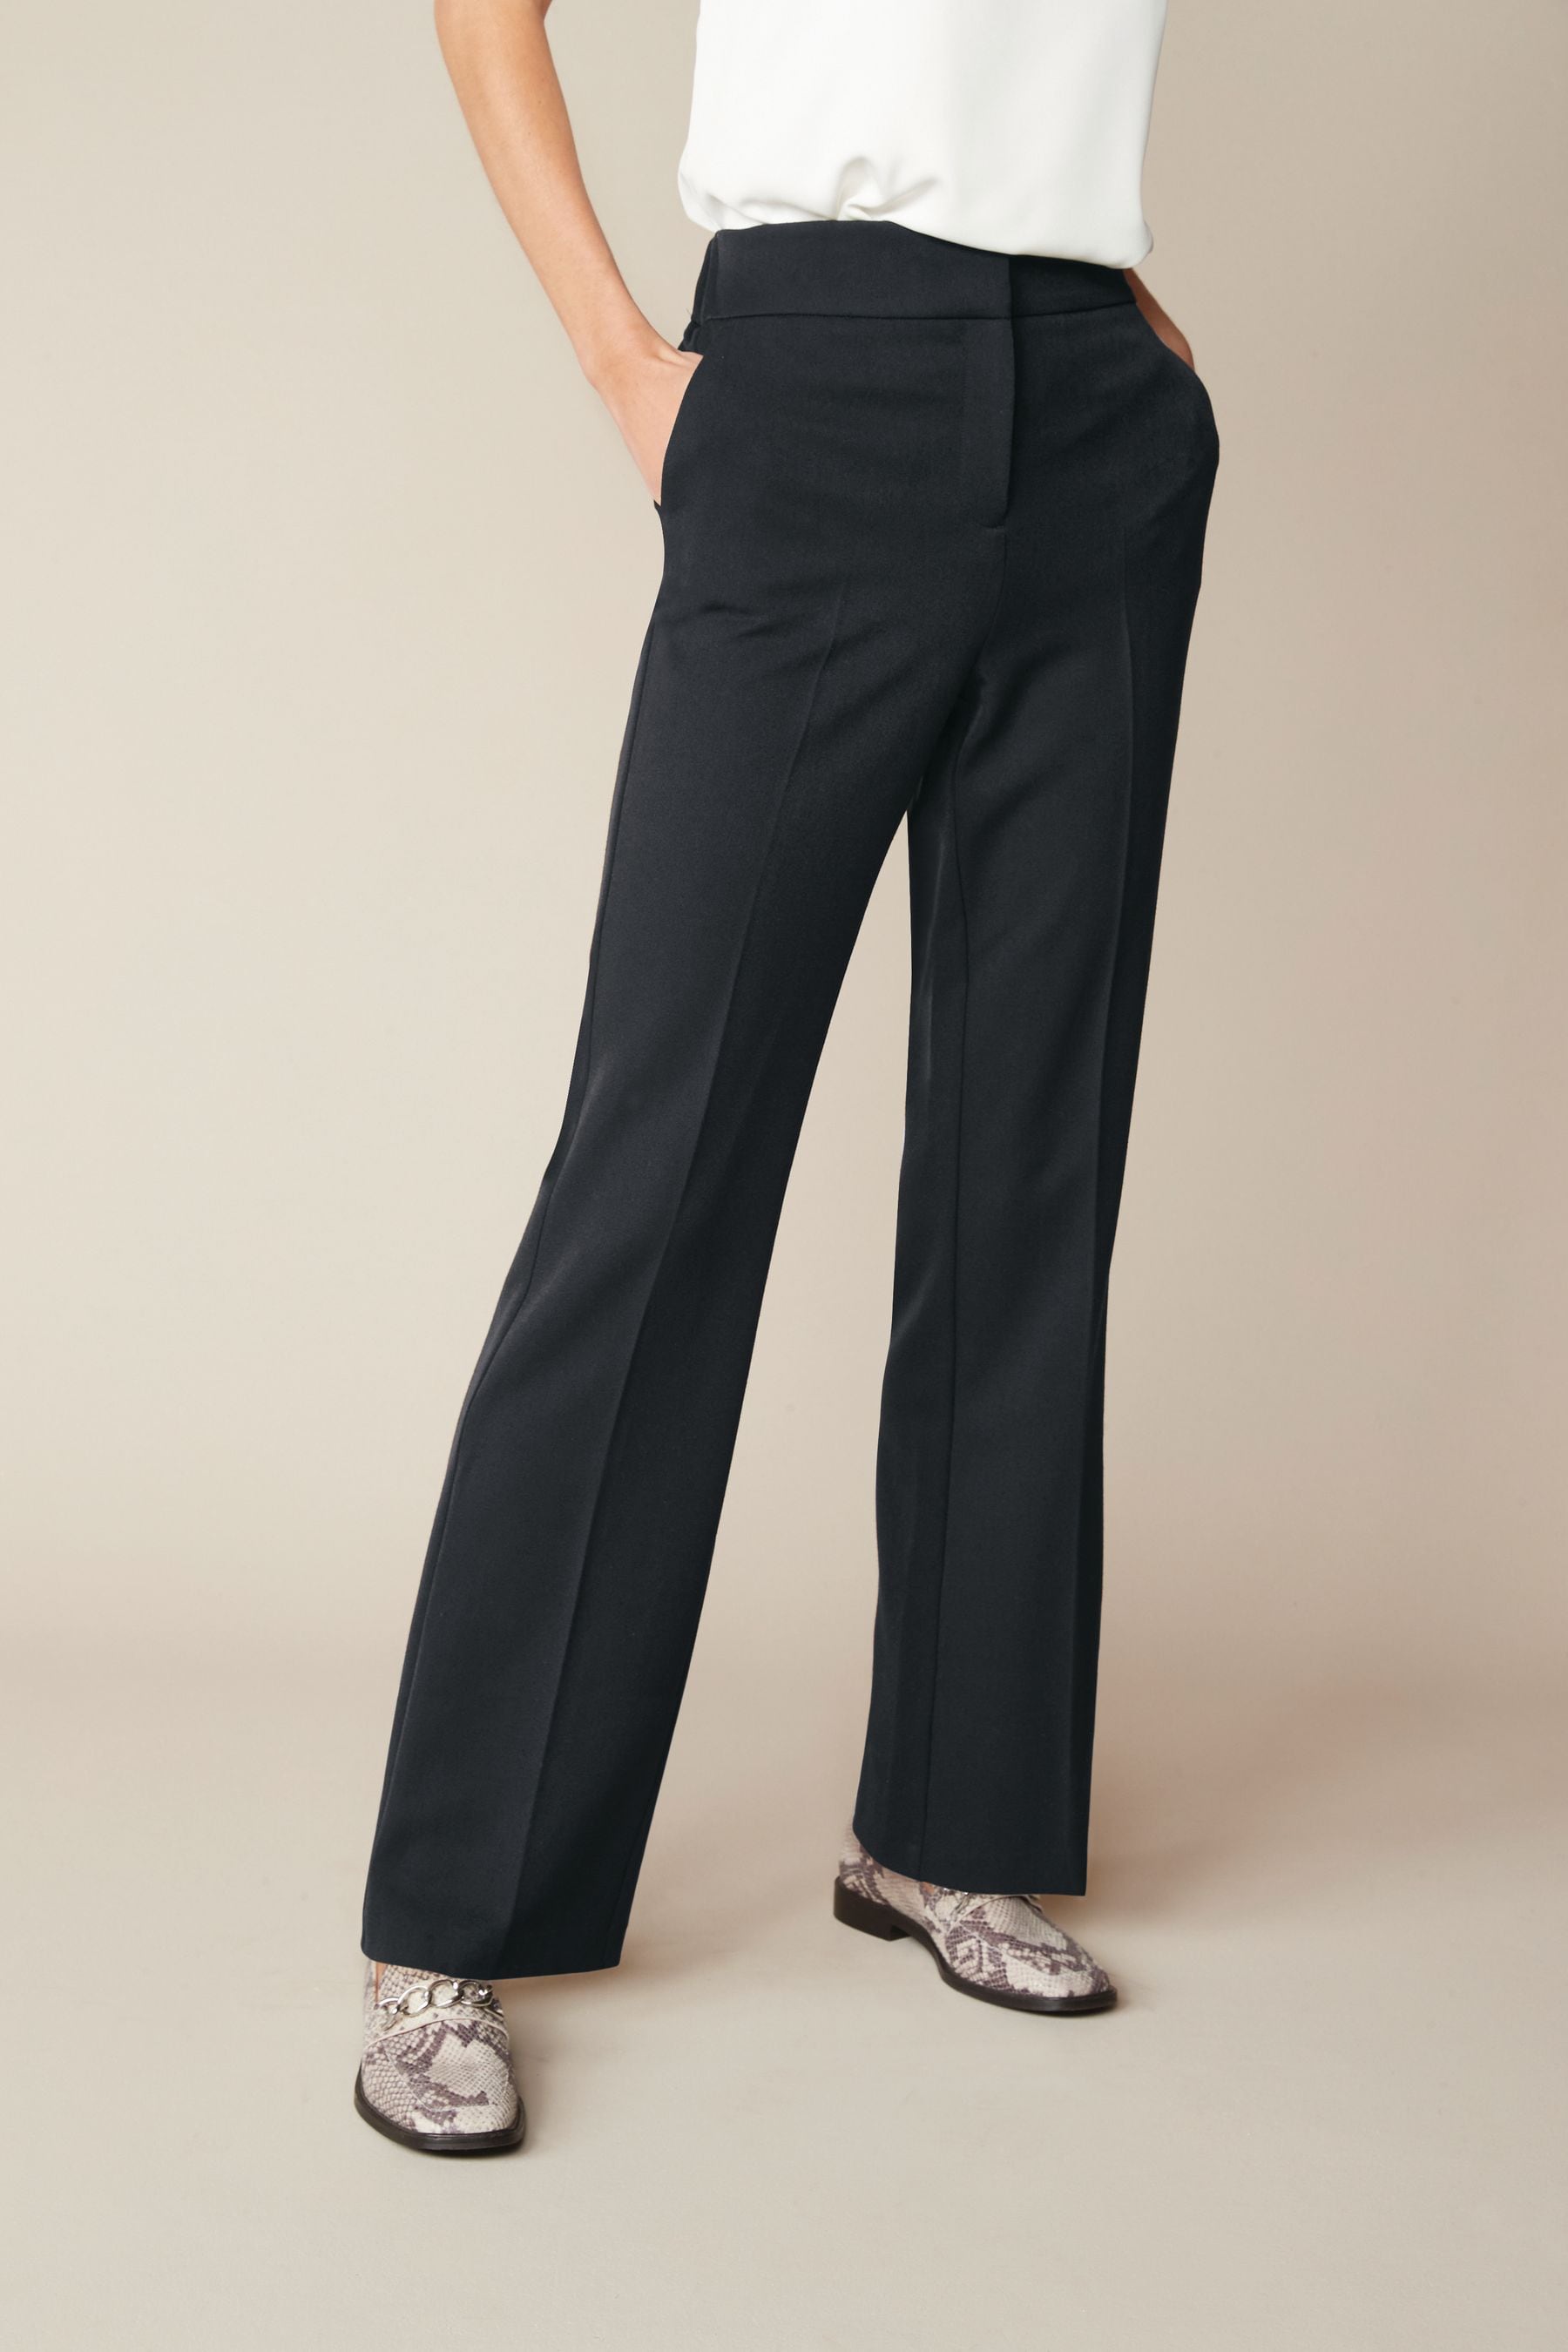 Buy Shapewear Boot Cut Trousers from the Next UK online shop